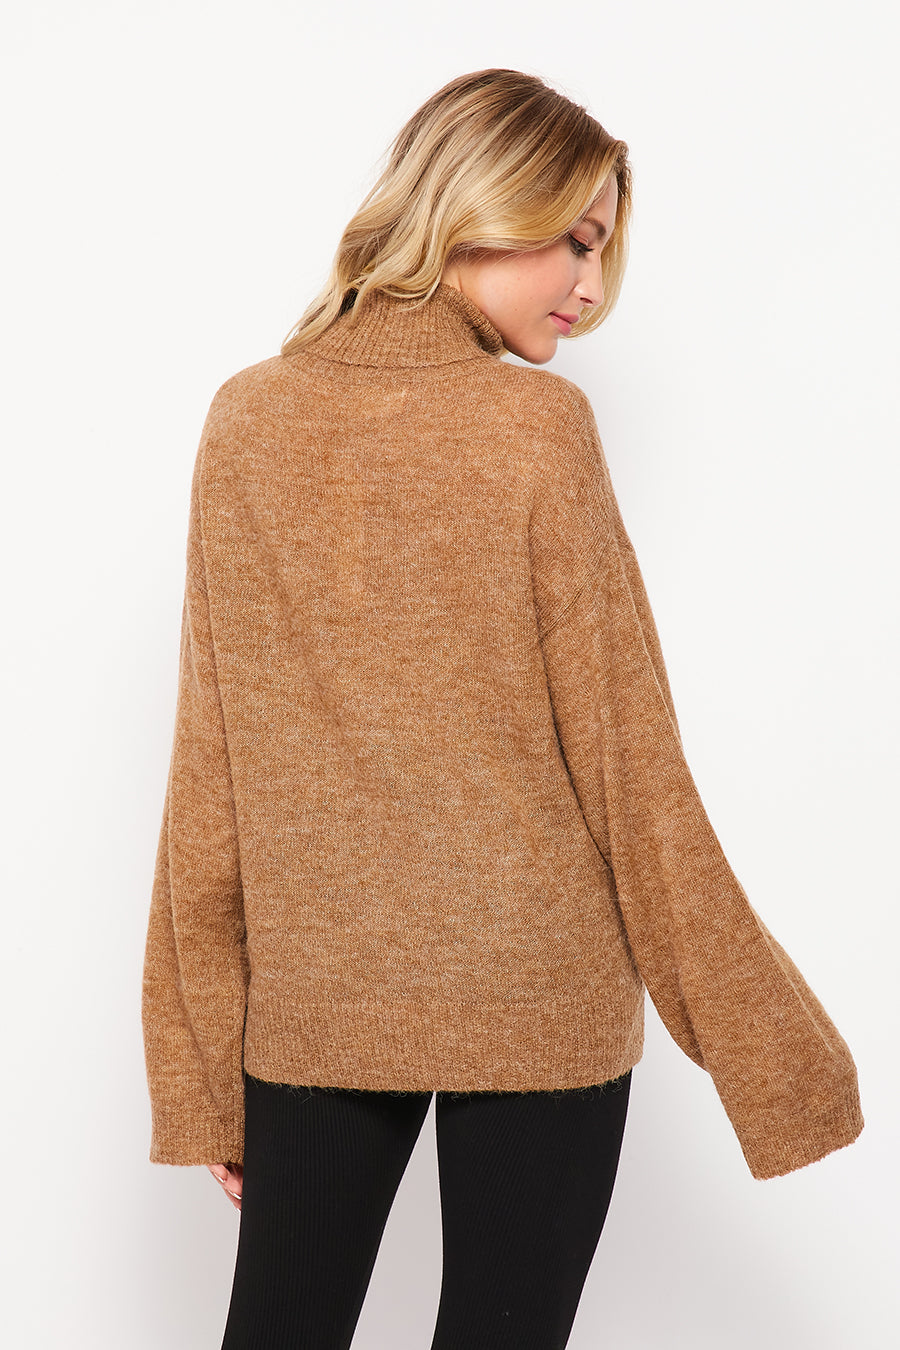 The Flying Birds Pullover - Brown